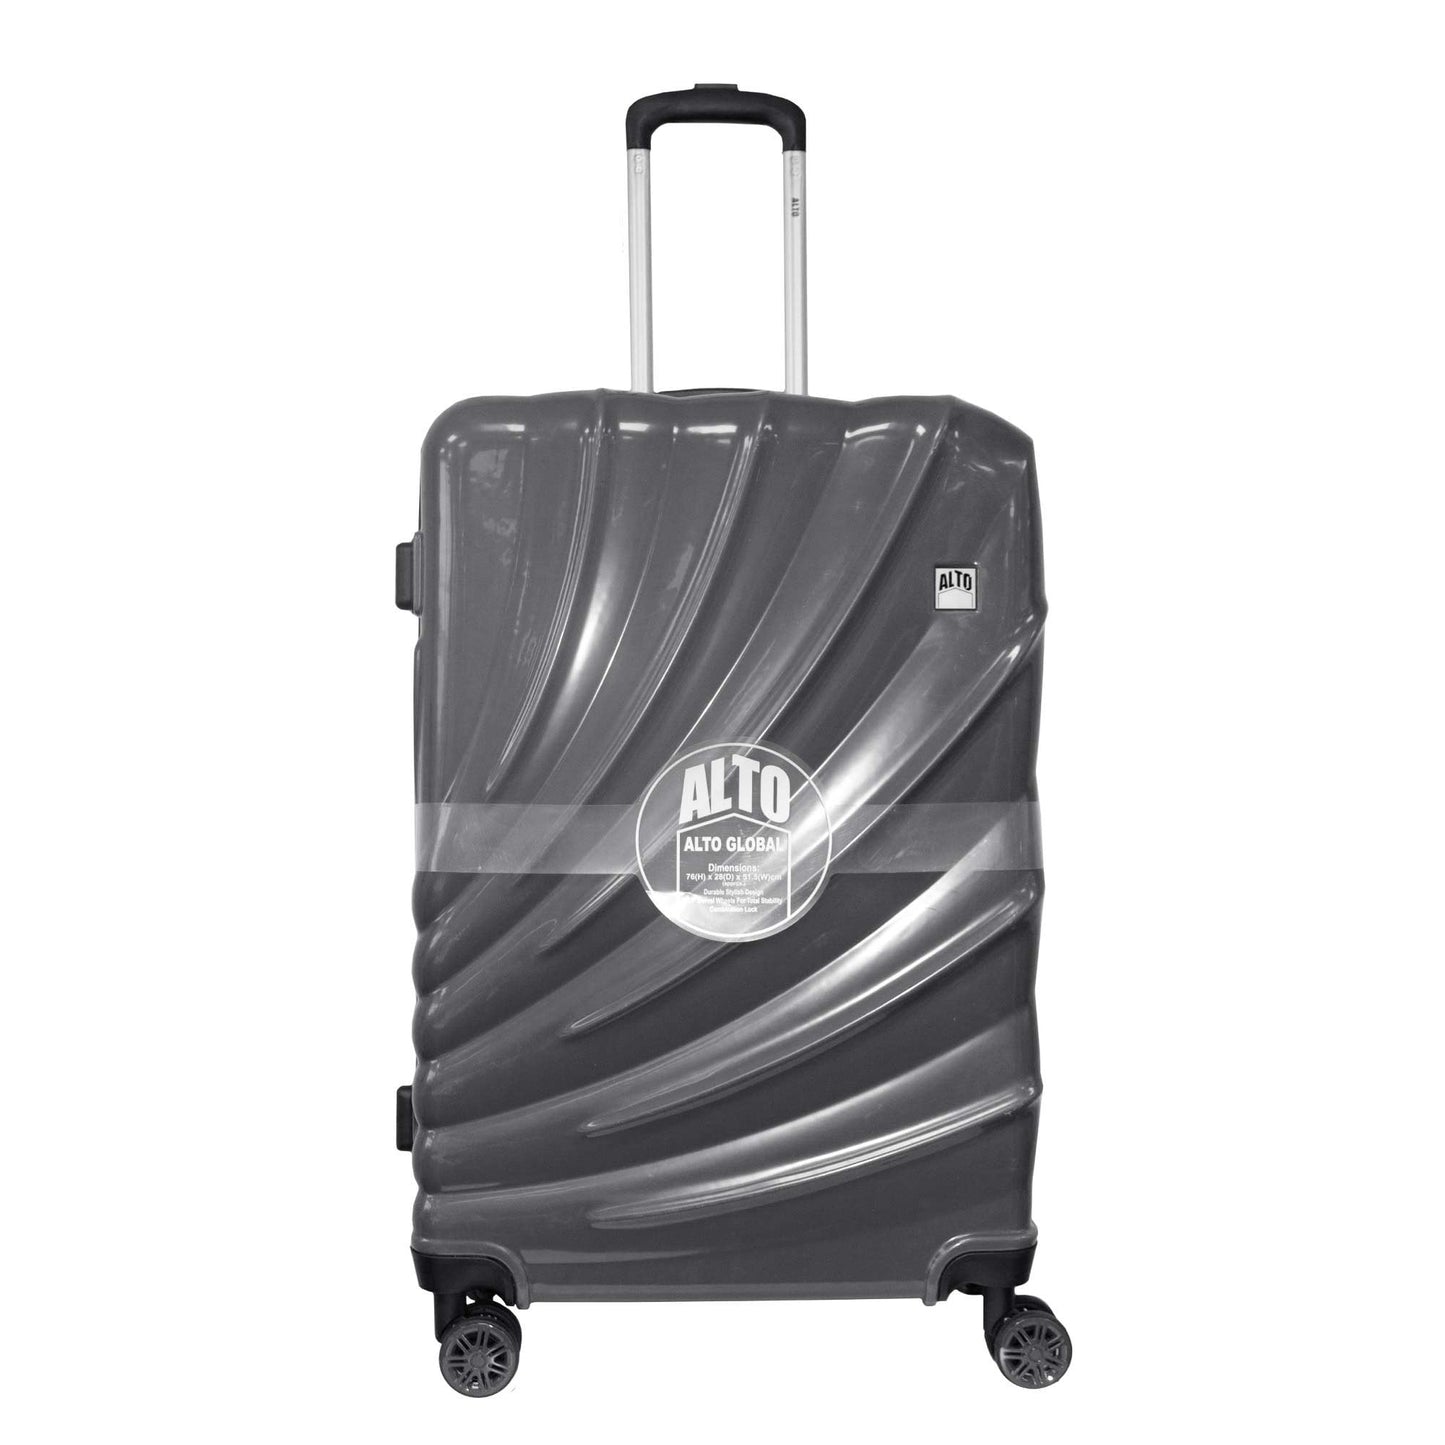 Alto Global Gloss ABS Luggage Suitcase Charcoal - 3 Sizes - 20 24 and 28inch